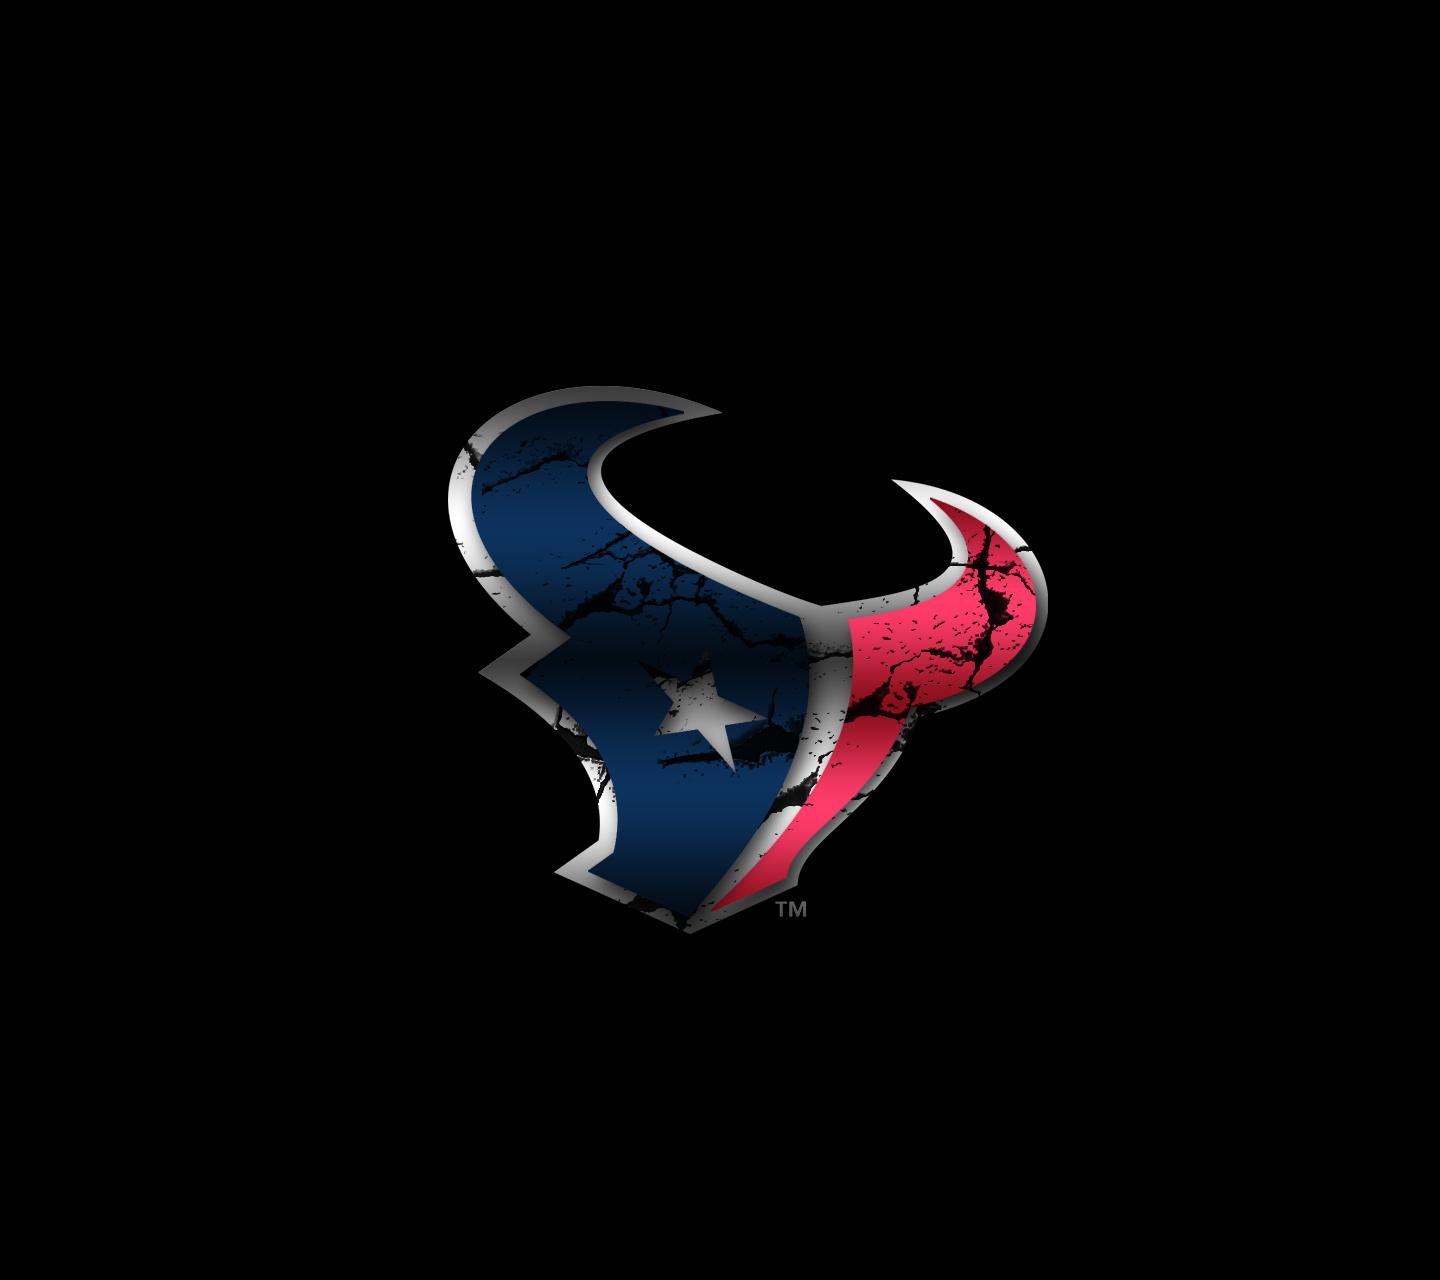 In Gallery: 46 Texans HD Wallpaper. Background, BsnSCB.com